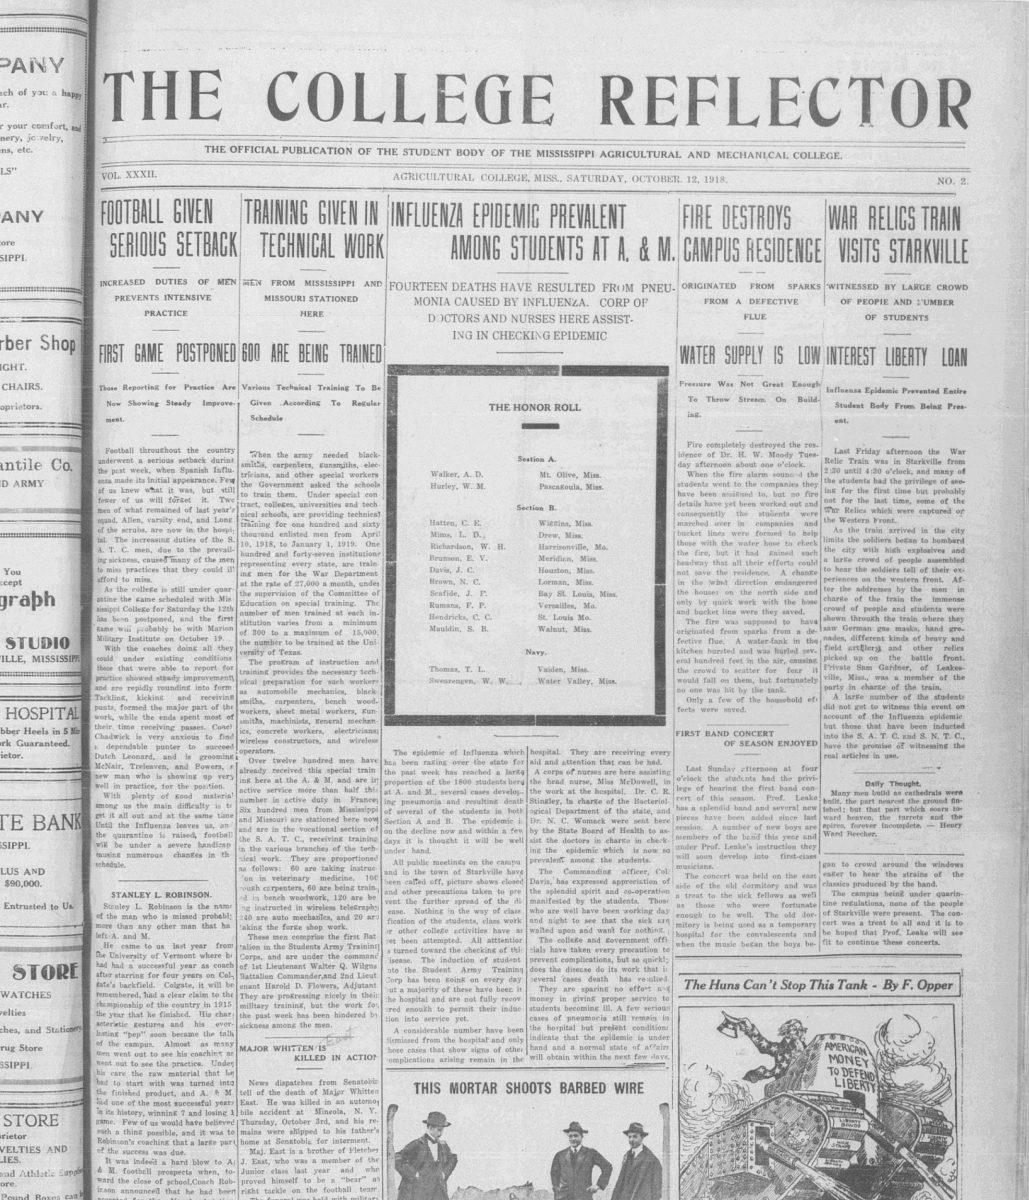 An+archived+news+article+describes+the+Influenza+Epidemic+of+1918.+In+a+similar+fashion%2C+MSU+Libraries+hopes+to+recreate+this+resource+for+the+present+day+with+the+digital+COVID-19+archive.